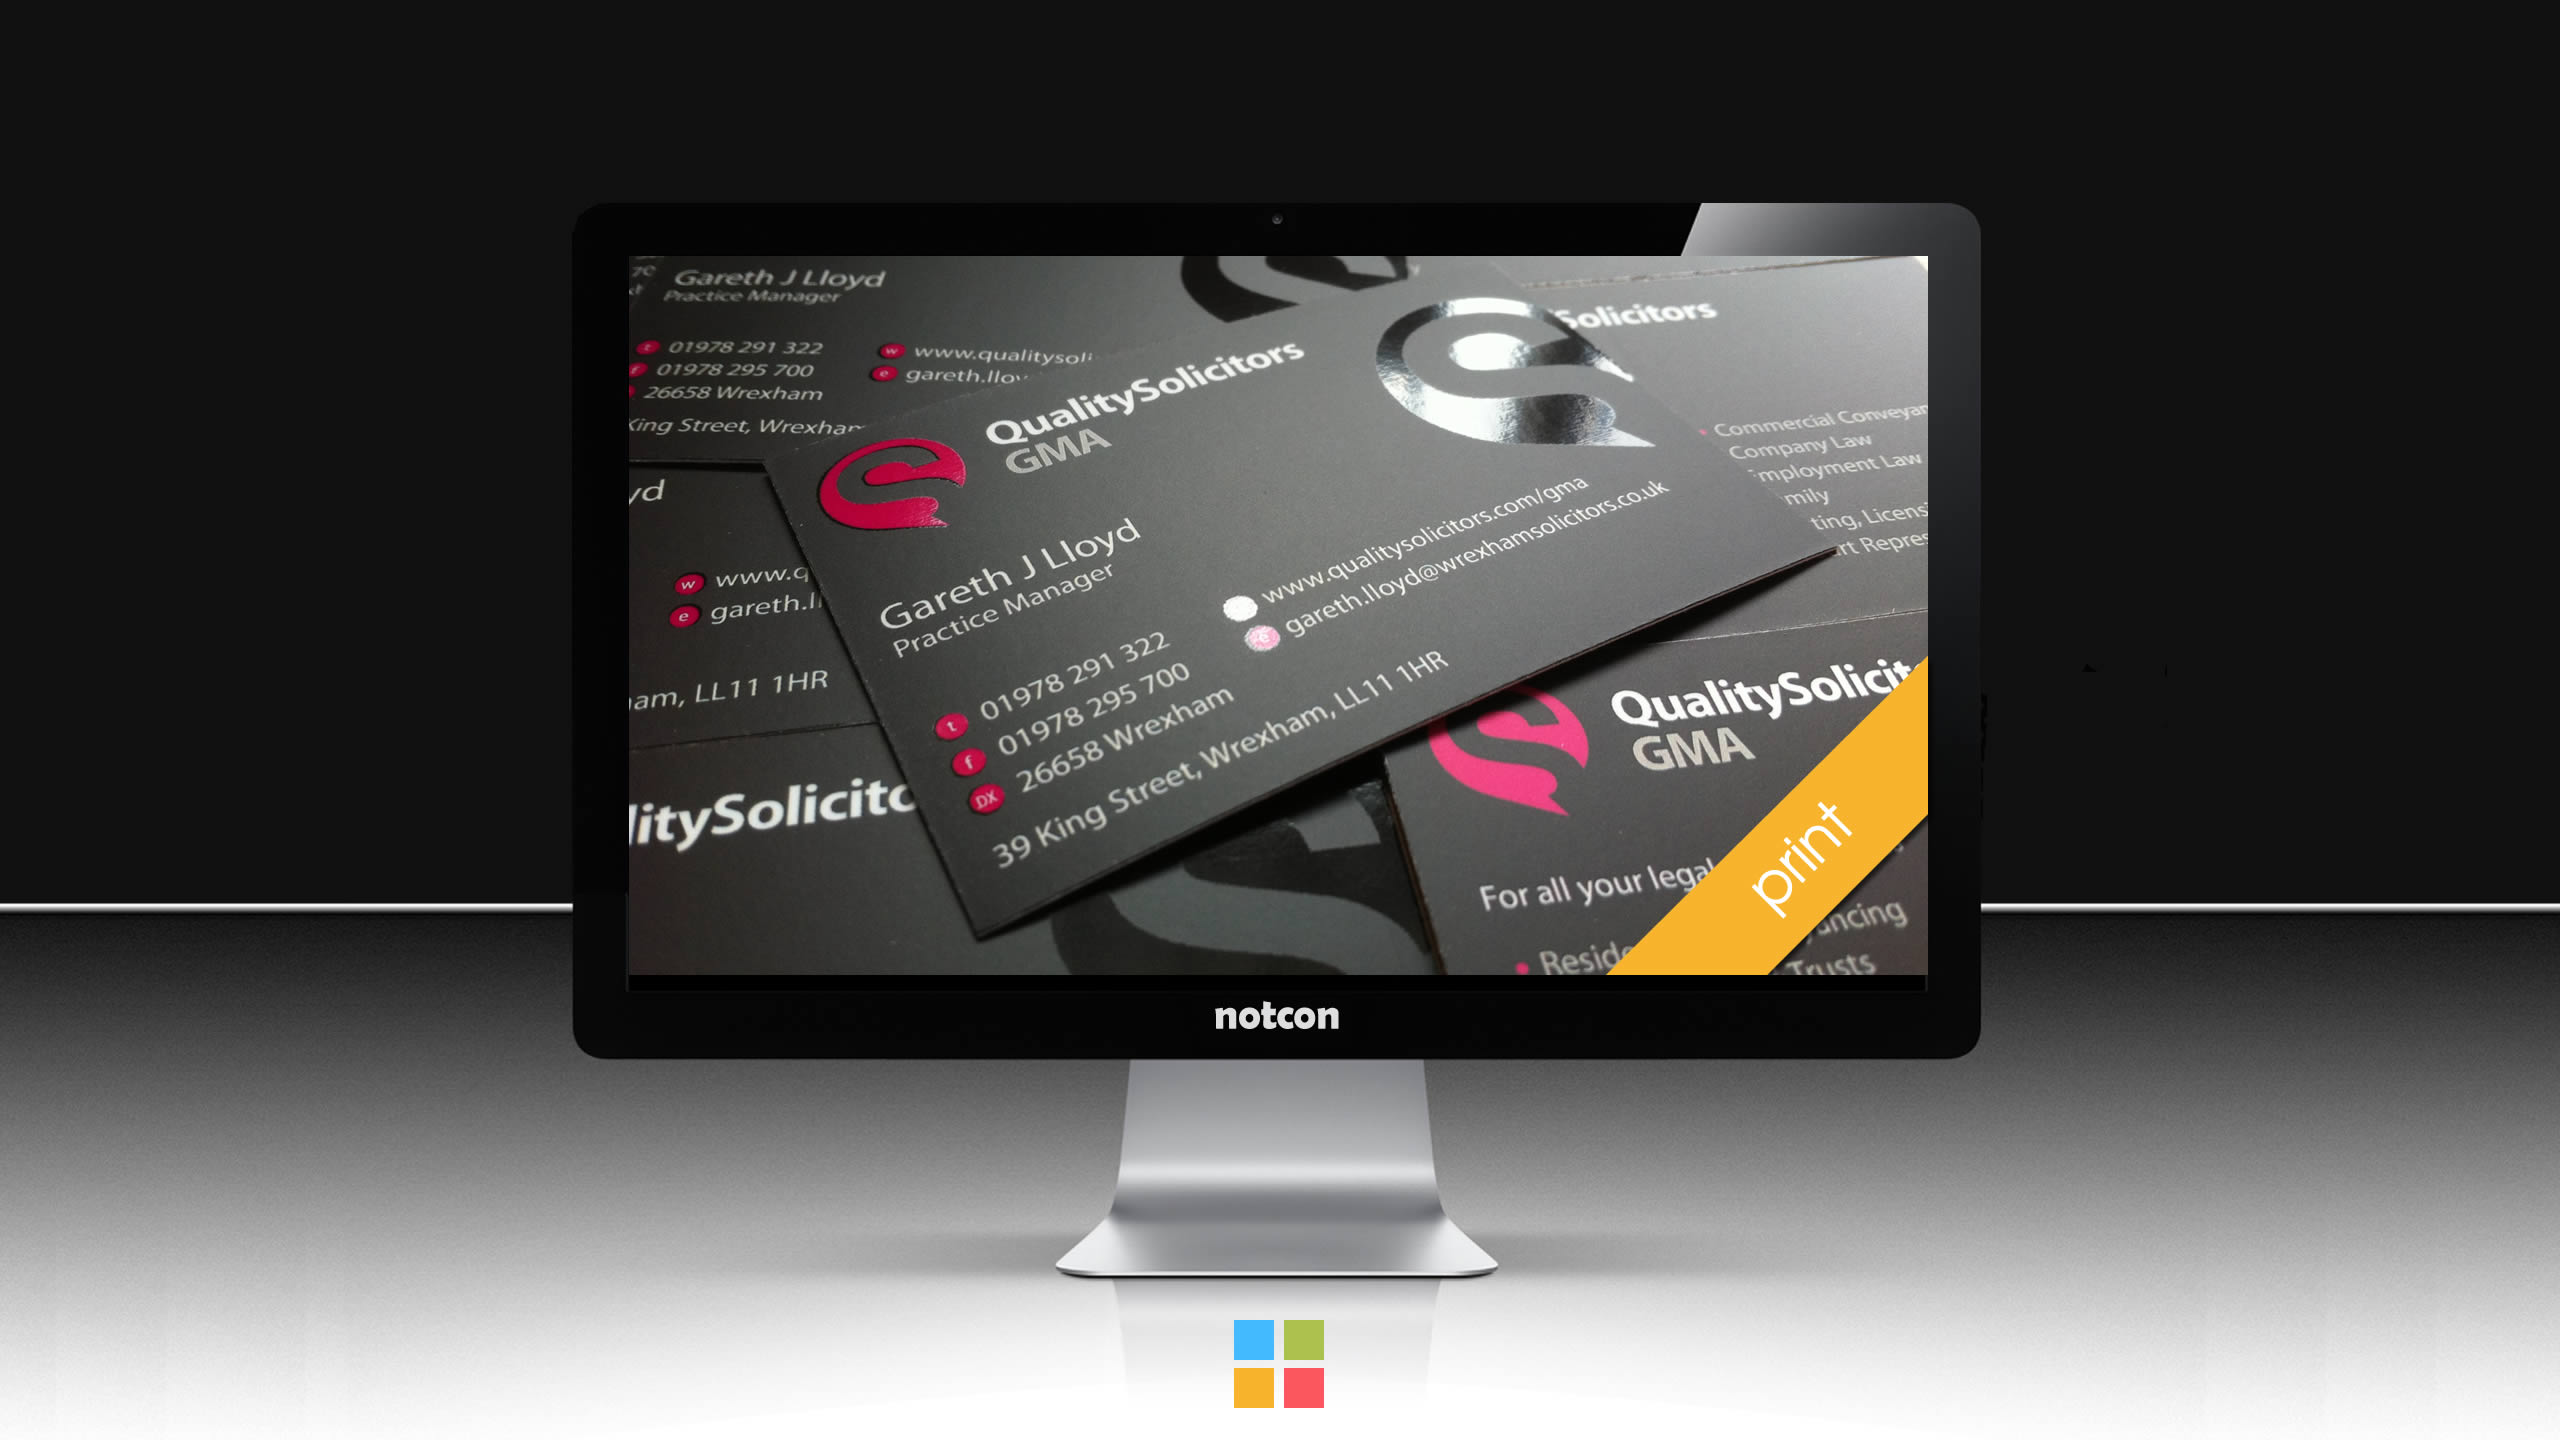 notcon - website designers, printers, graphic designers and online marketing firm